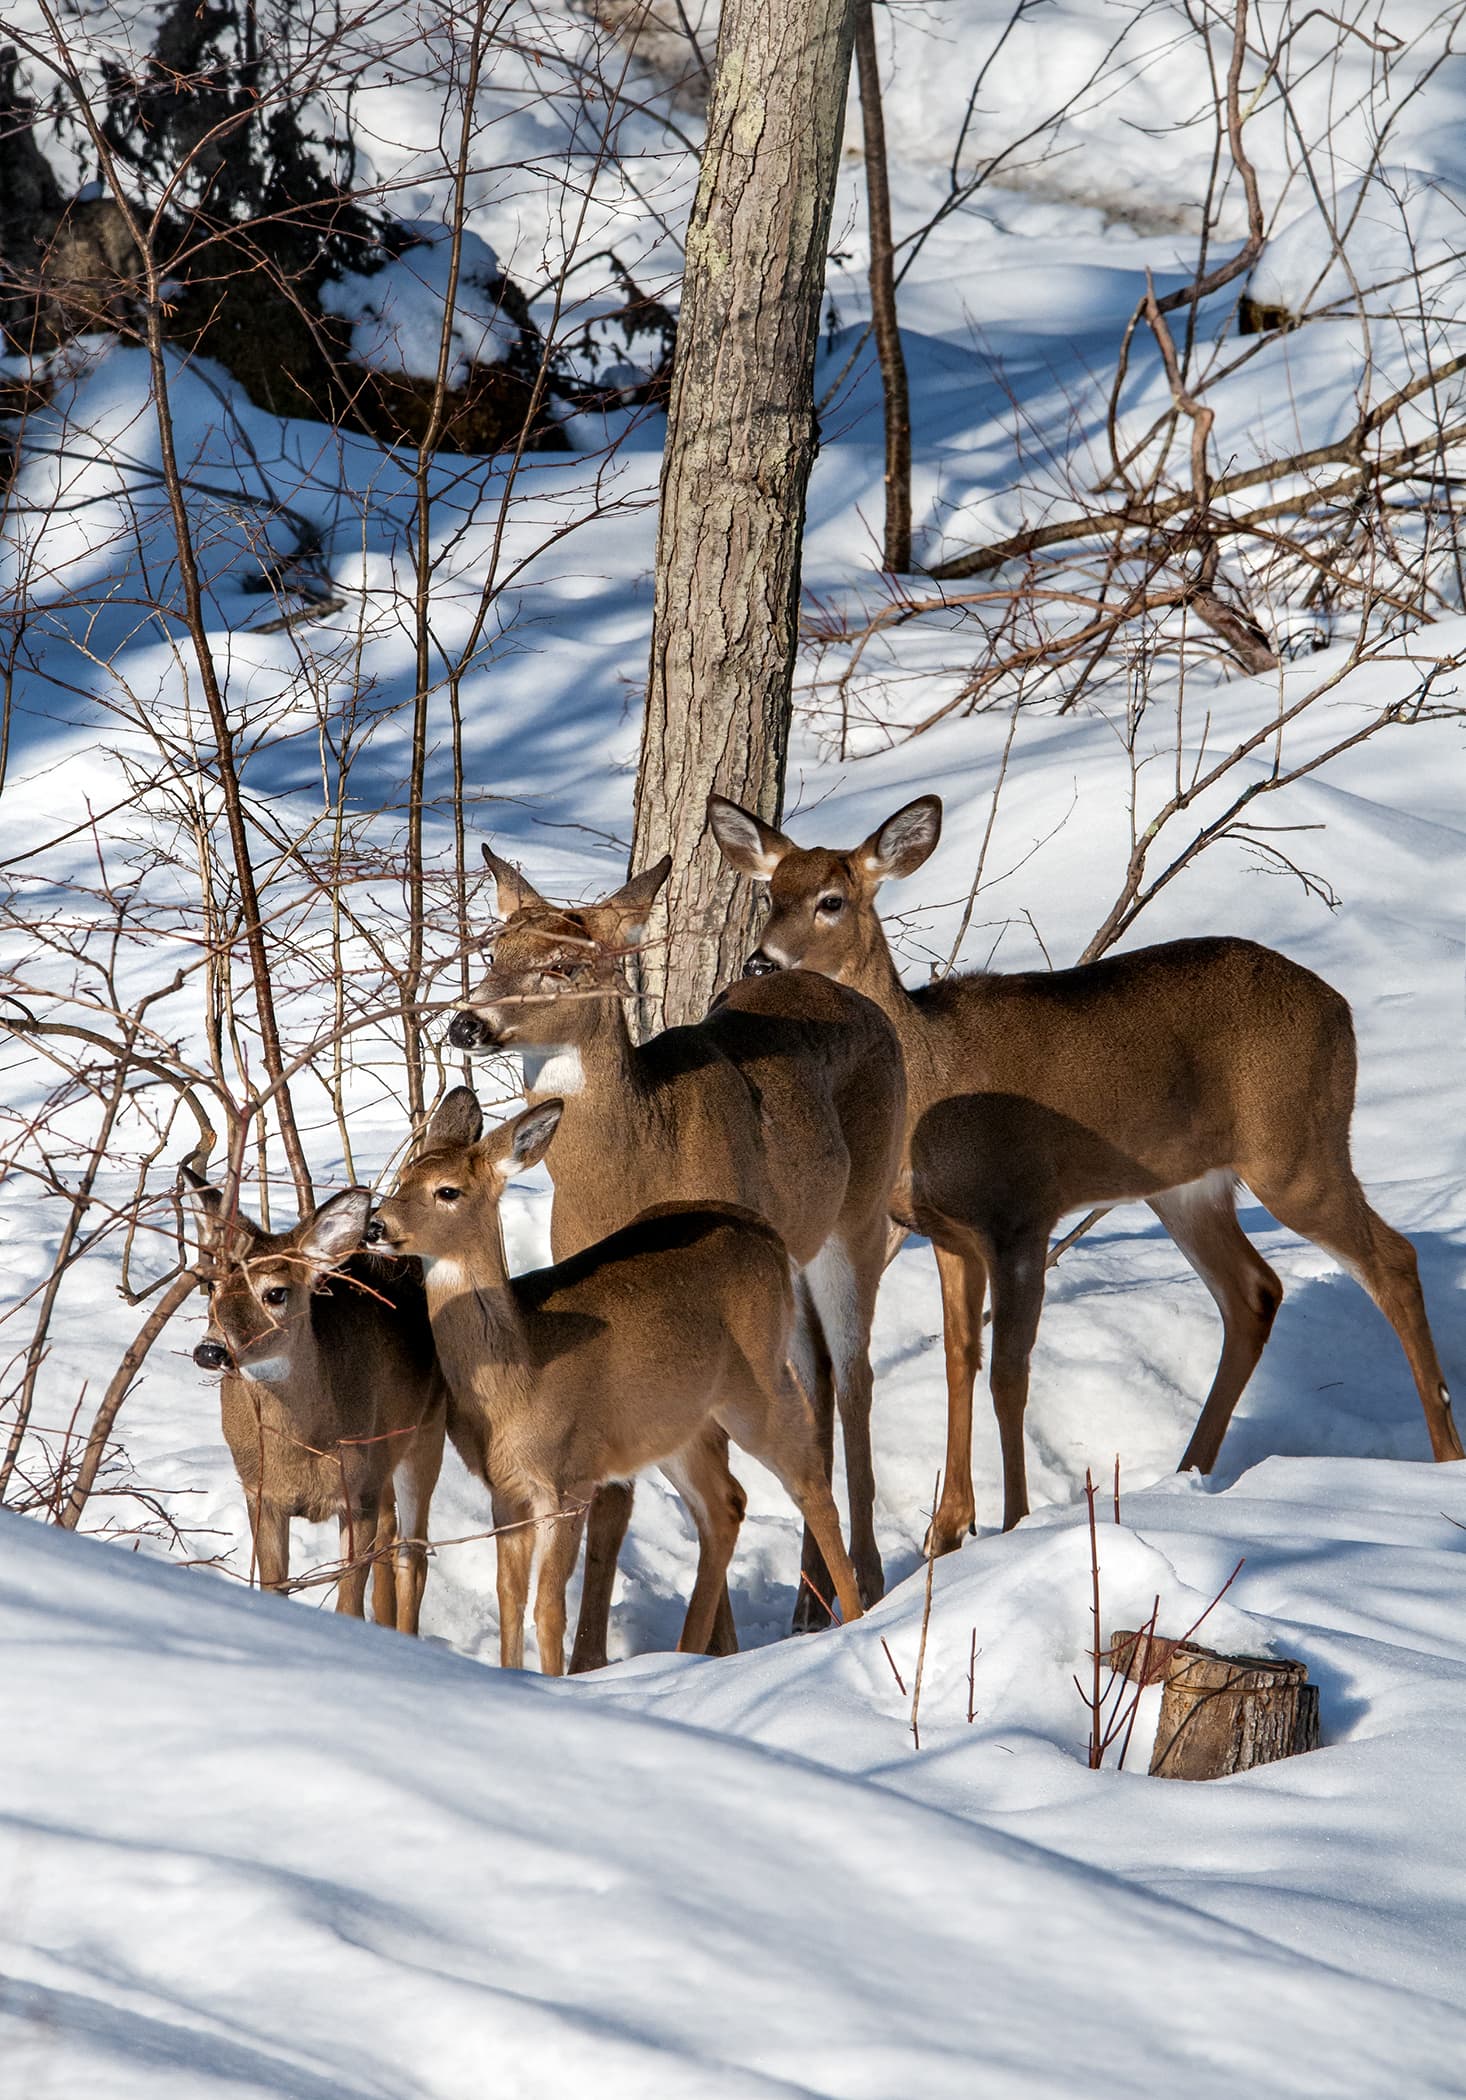 Mass. is monitoring white-tailed deer for COVID. Here's why